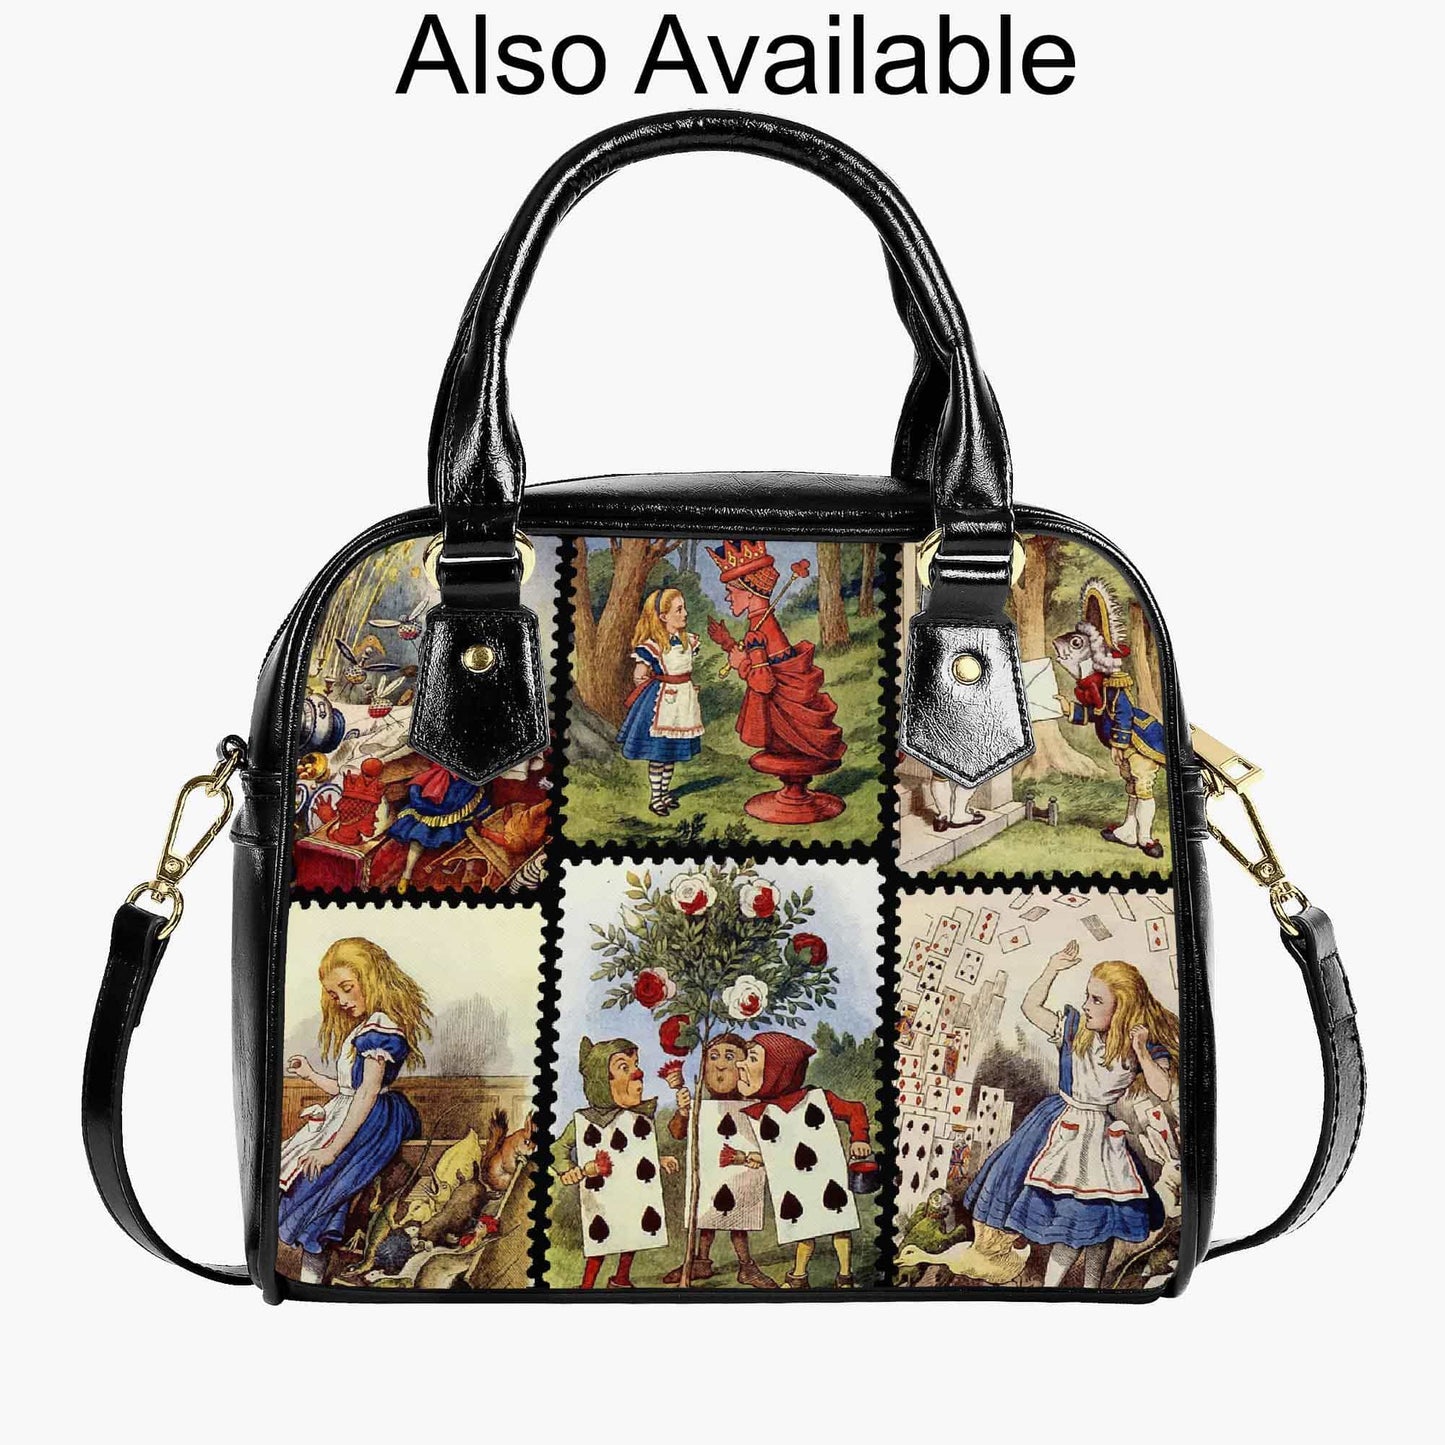 matching handbag to the cuter than cute mini small size Alice in Wonderland backpack featuring gorgeous colourised Alice in Wonderland illustrations